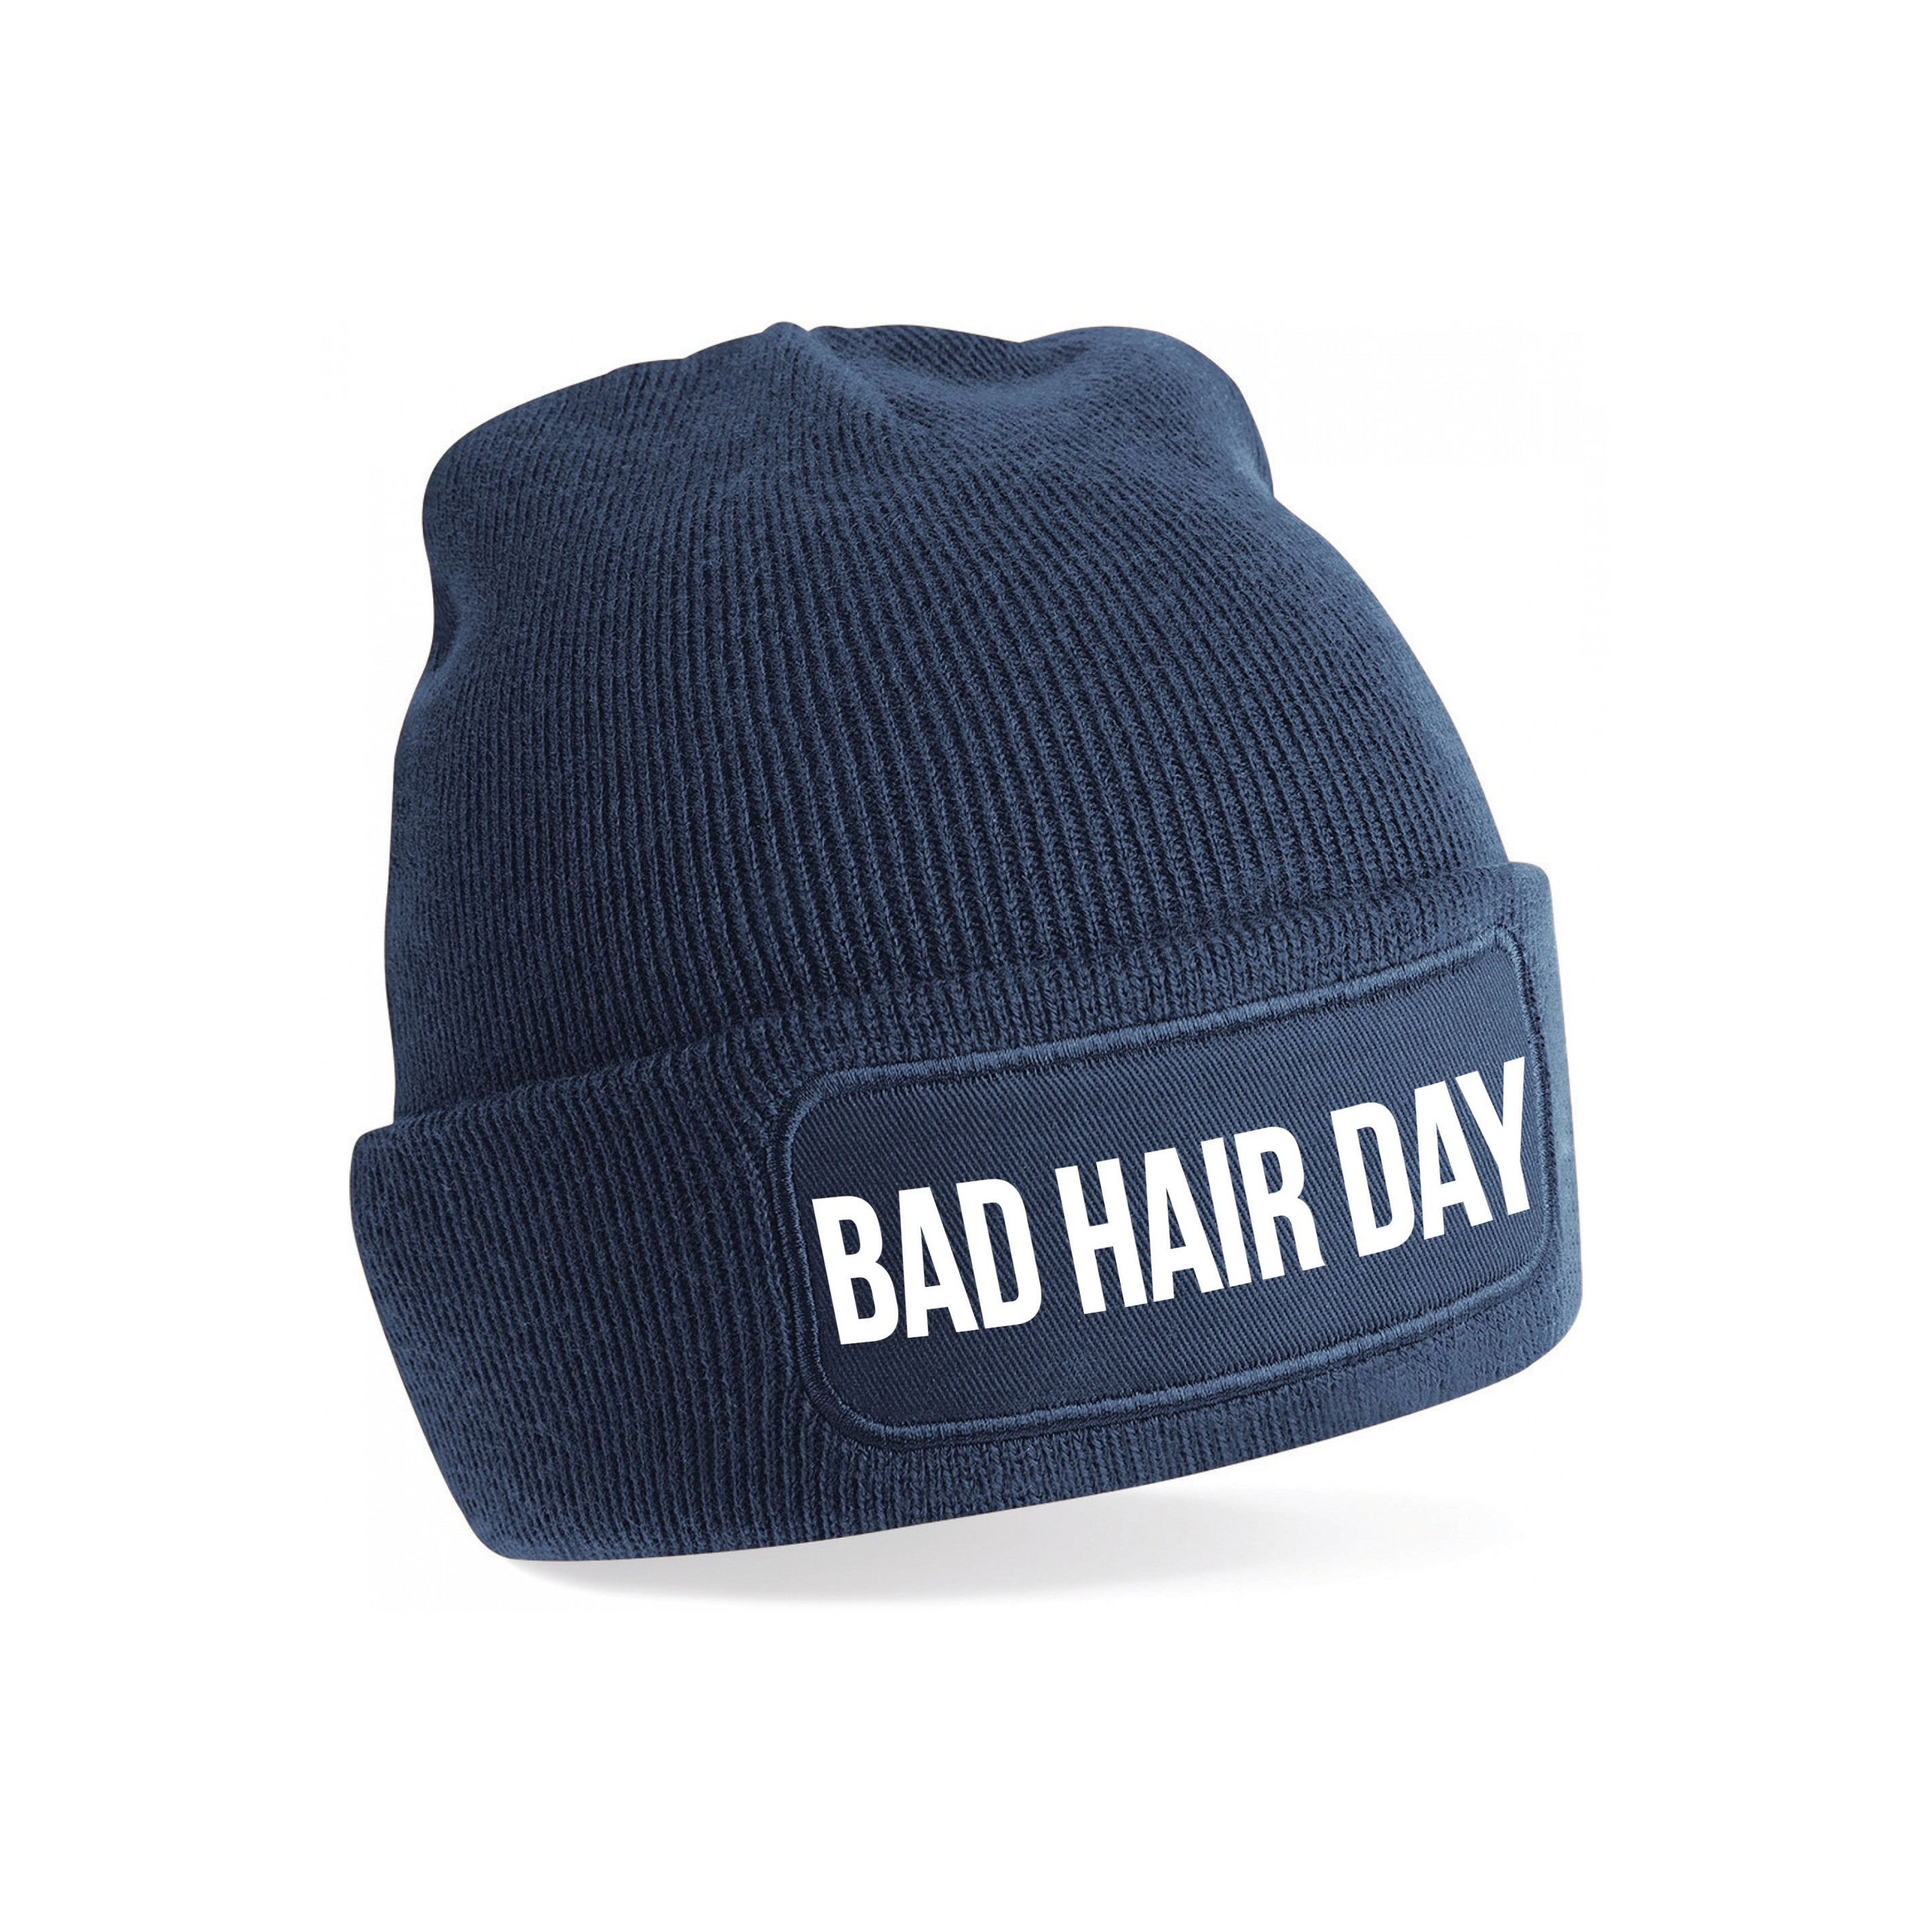 Bad hair day muts unisex one size Navy